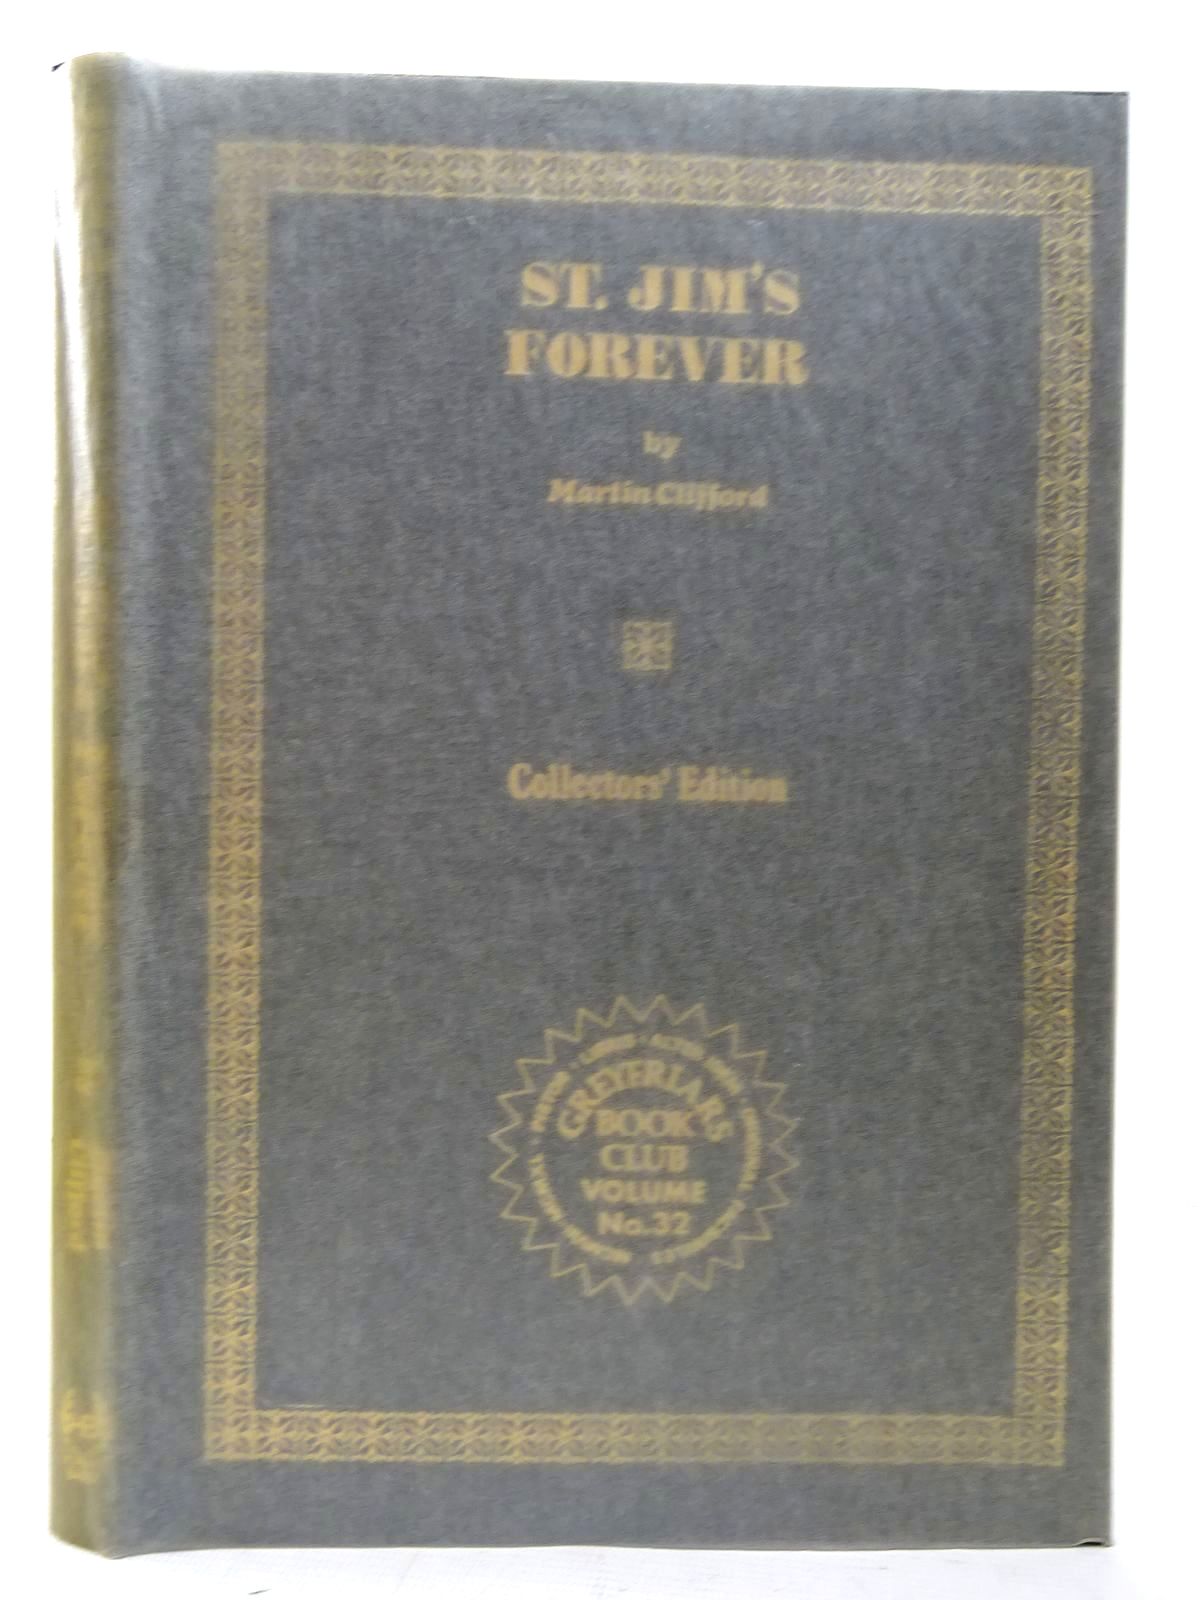 Photo of ST. JIM'S FOREVER written by Clifford, Martin
Richards, Frank published by Howard Baker (STOCK CODE: 2126717)  for sale by Stella & Rose's Books